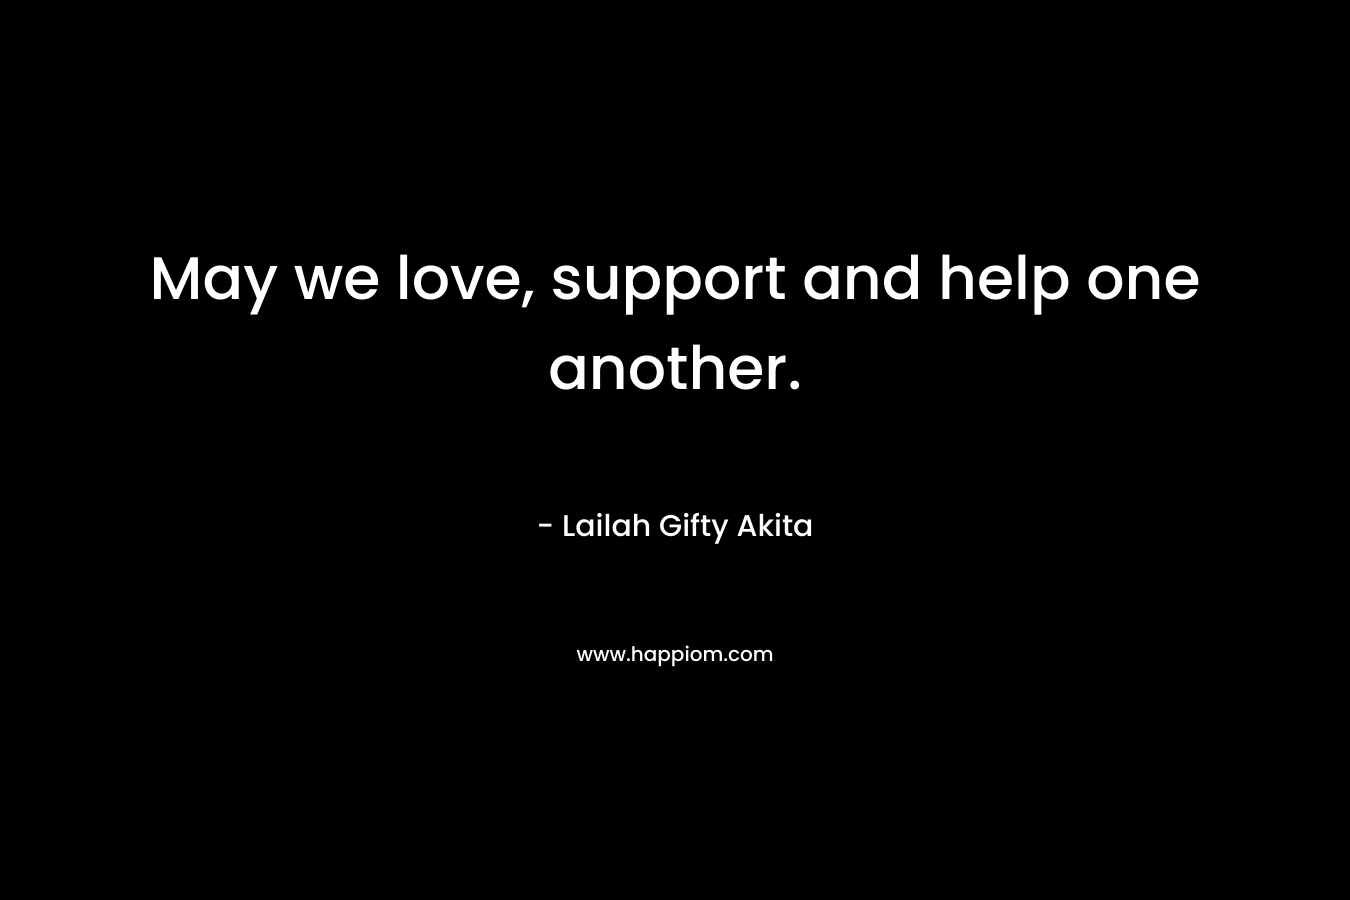 May we love, support and help one another.